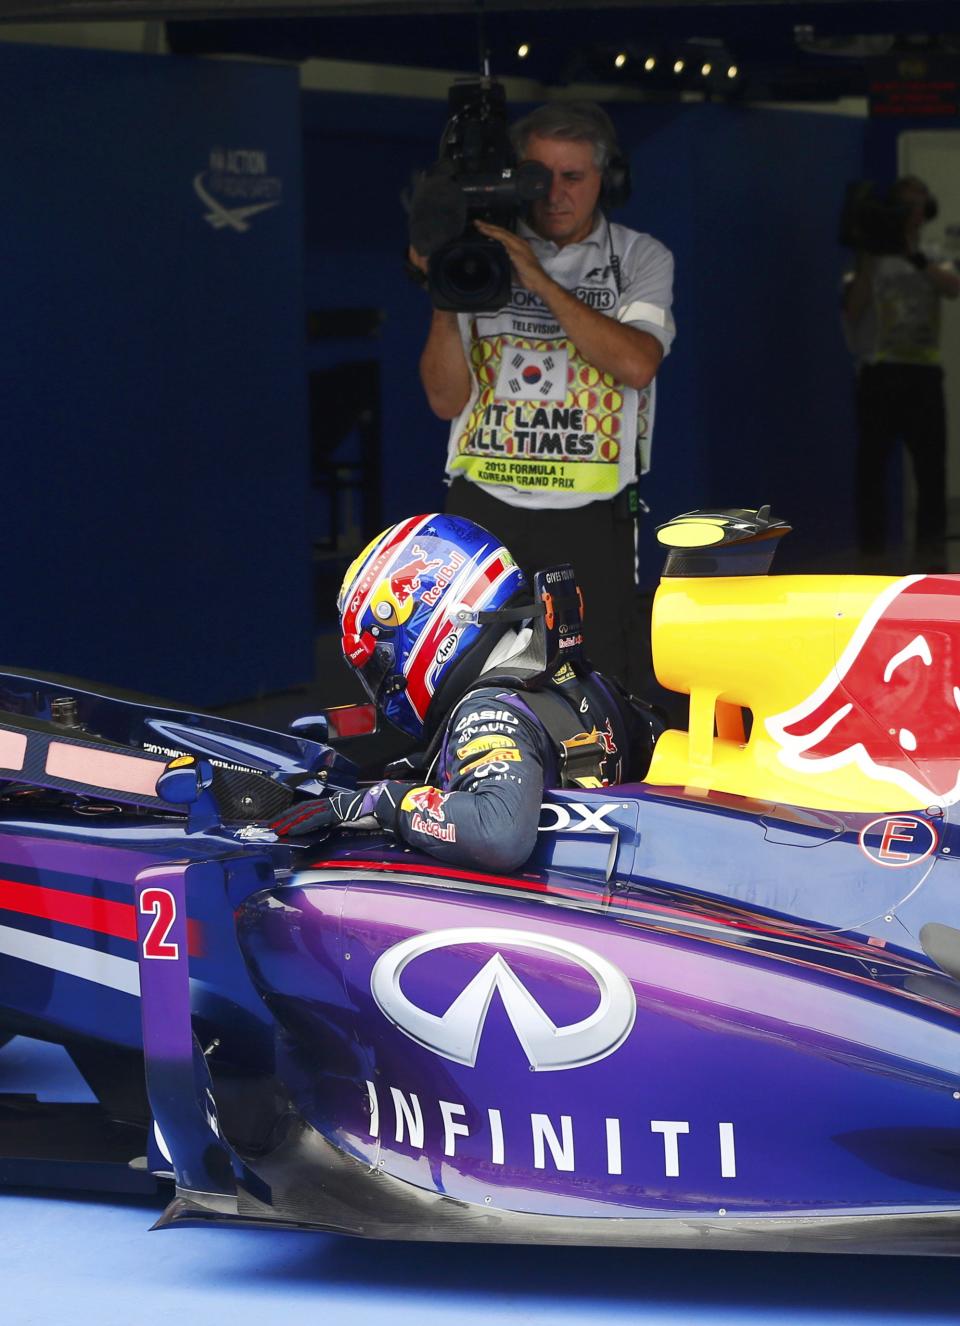 Red Bull Formula One driver Mark Webber of Australia gets out of his car after the qualifying session for the Korean F1 Grand Prix at the Korea International Circuit in Yeongam, October 5, 2013. REUTERS/Kim Hong-Ji (SOUTH KOREA - Tags: SPORT MOTORSPORT F1)